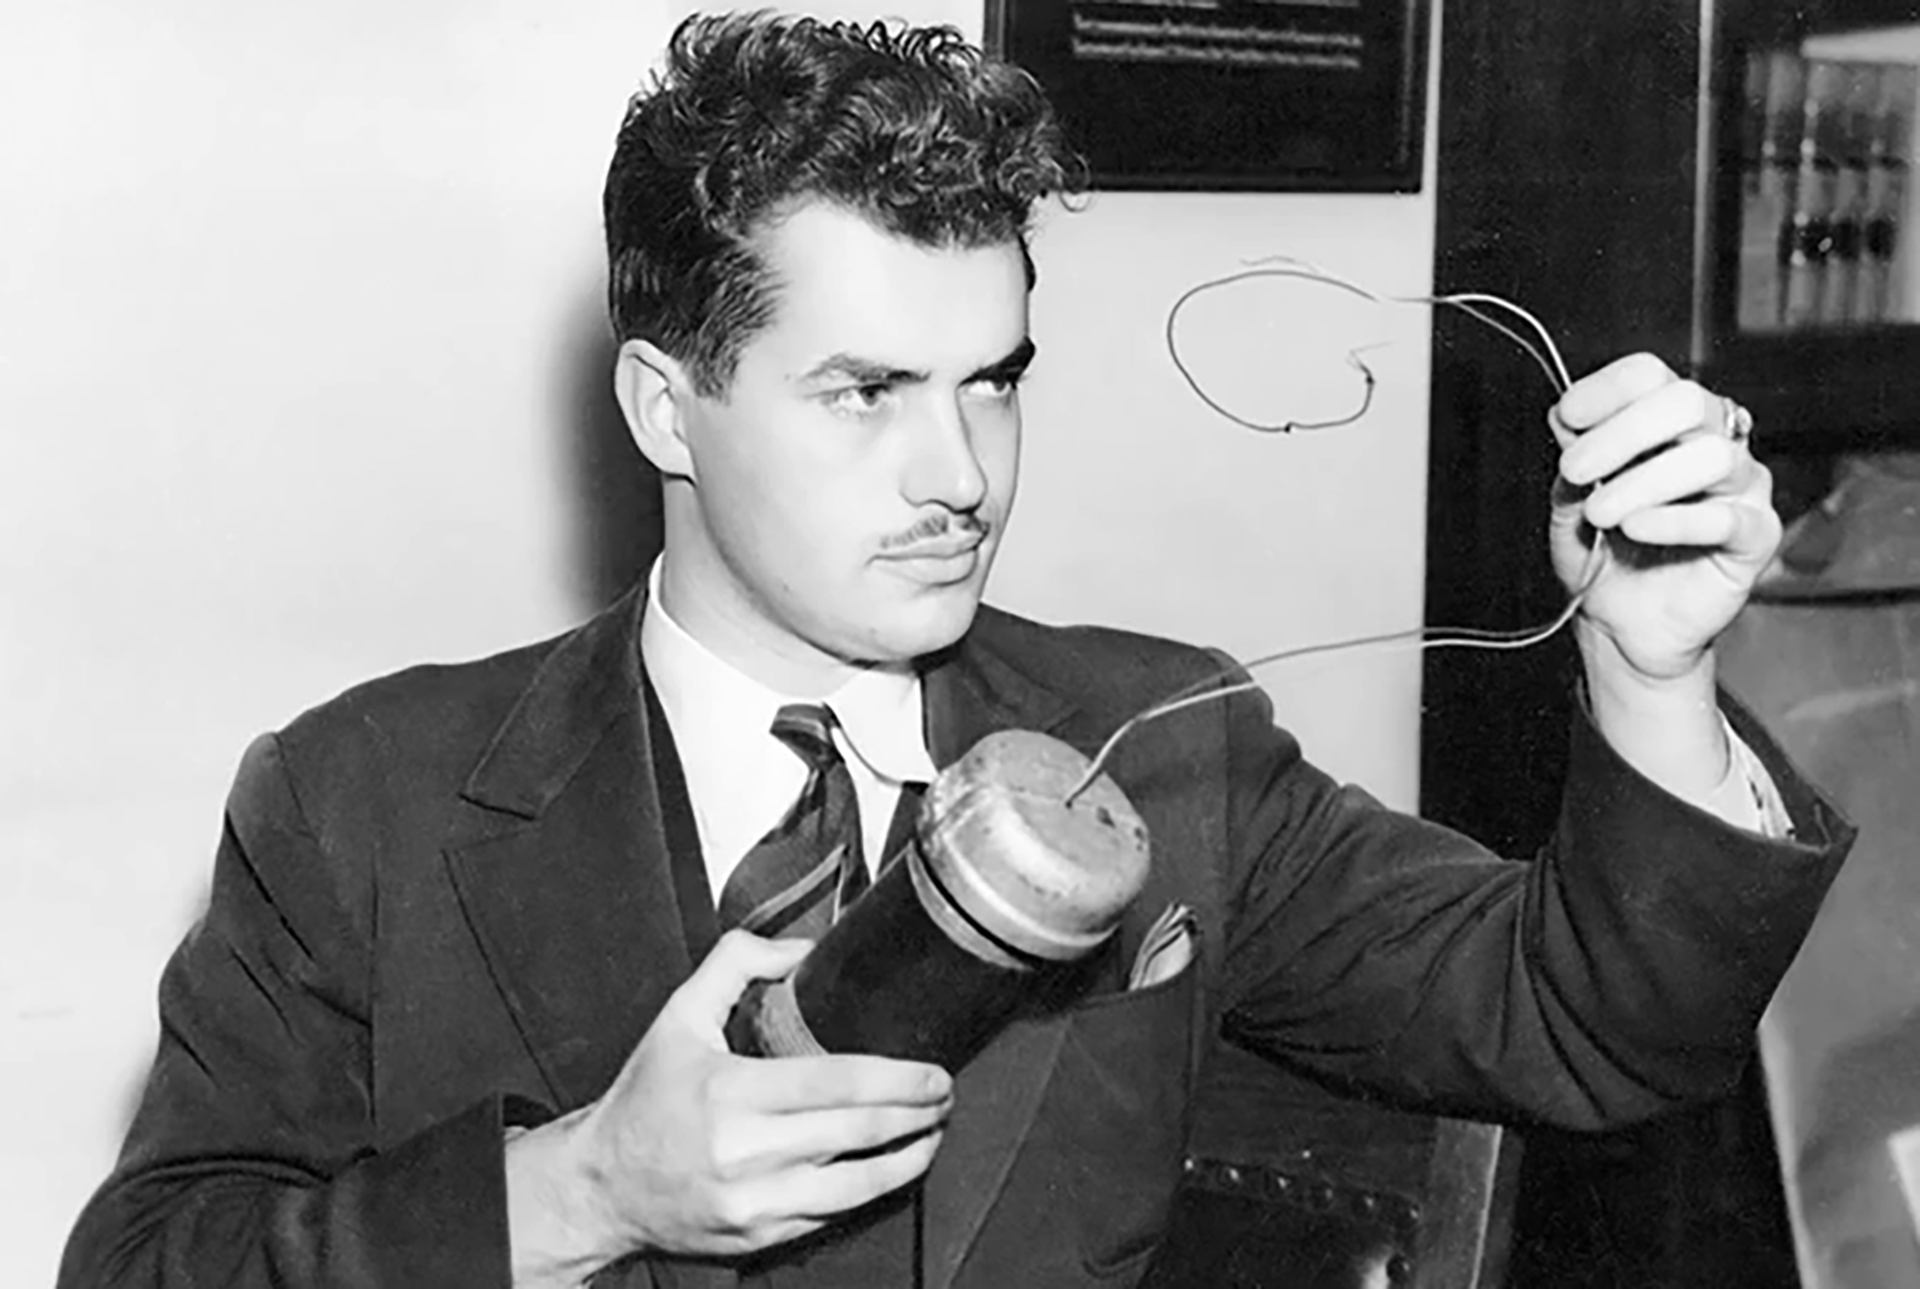 Jack Parsons in 1938. (Wikipedia)